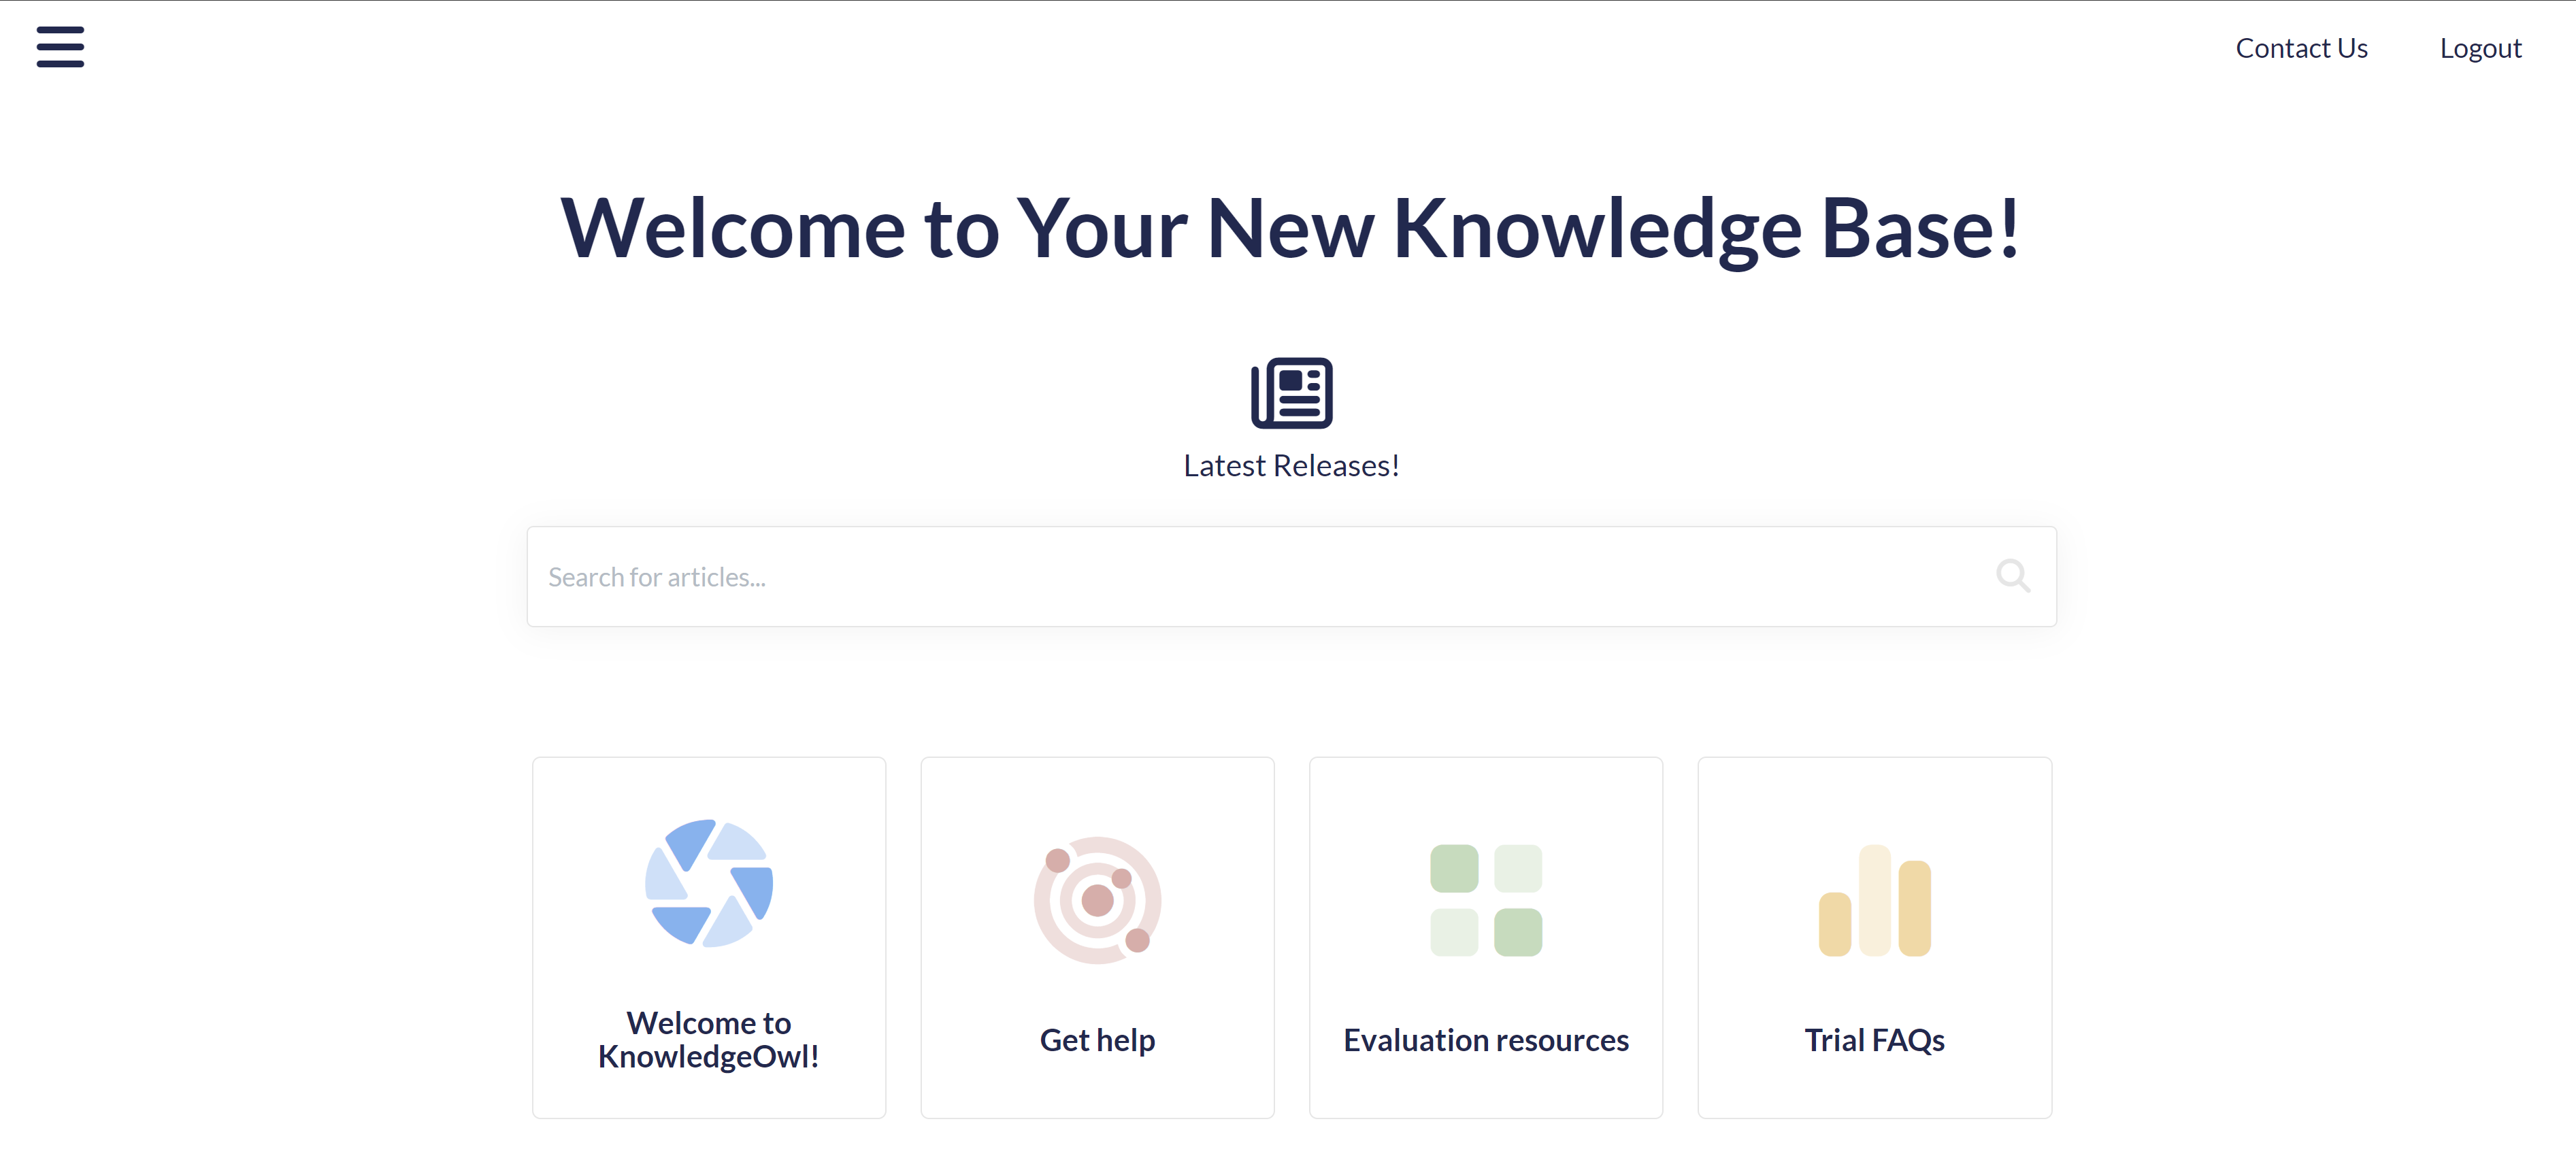 The homepage of a sample knowledge base. The newspaper icon and Latest Releases text display below the knowledge base welcome statement and above the search bar.